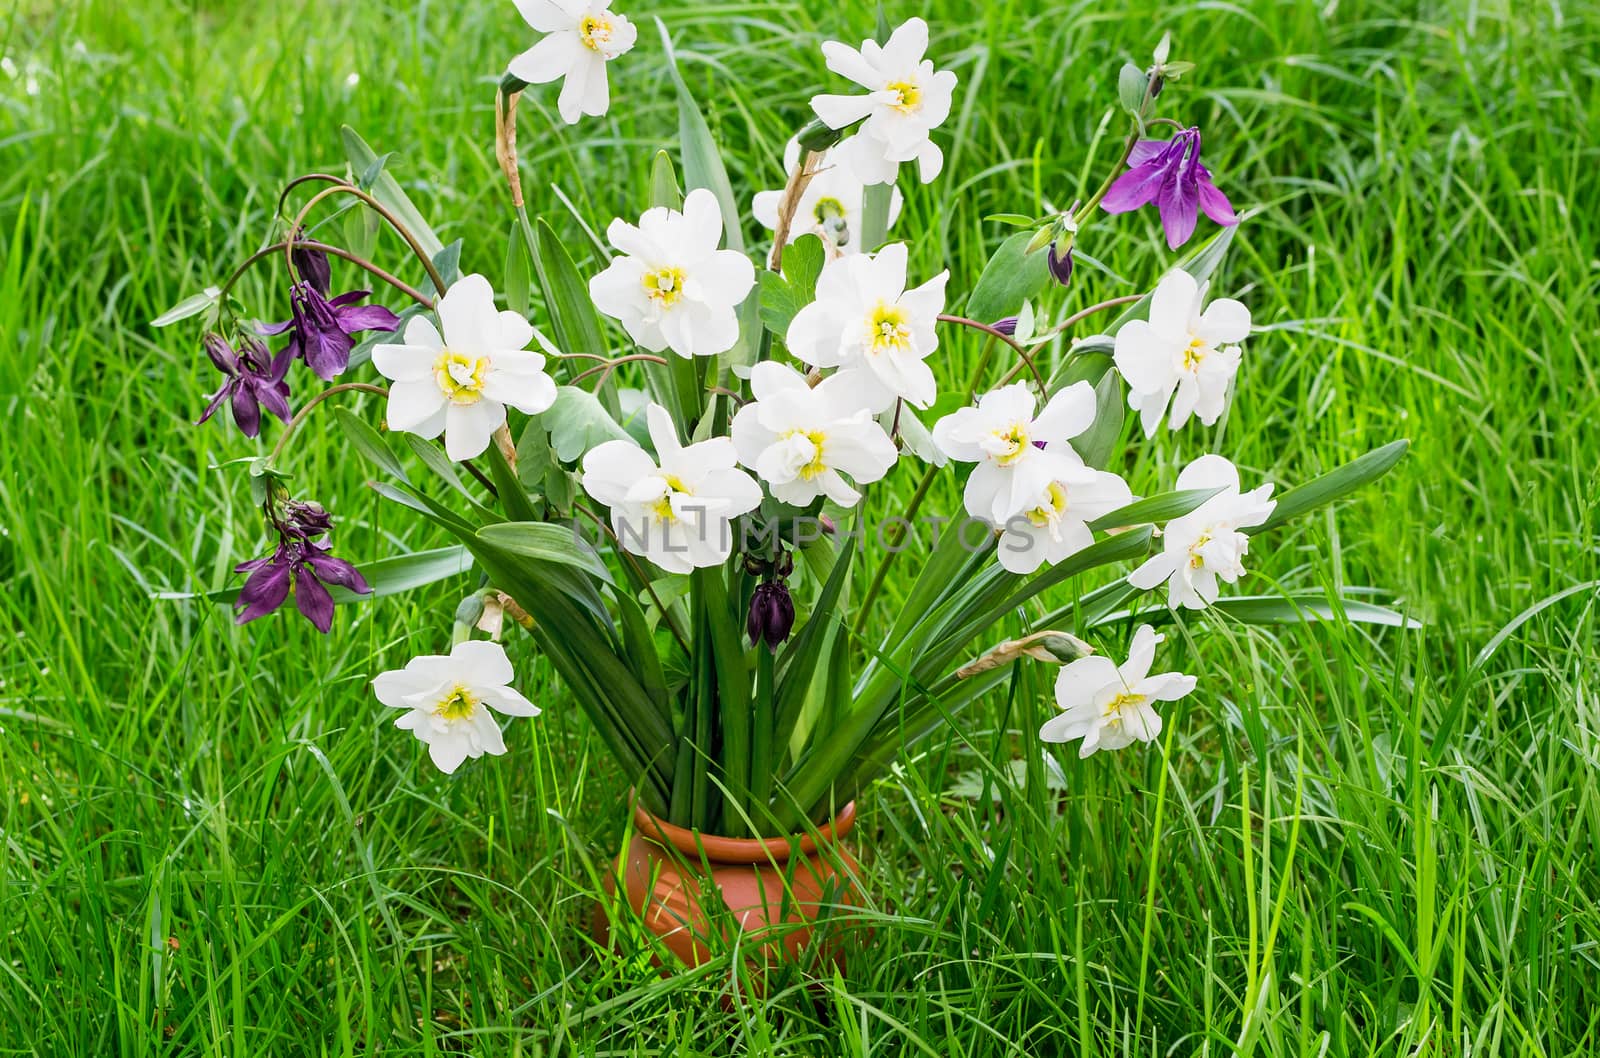 Beautiful big flowers of narcissuses in a vase against a green grass in a garden